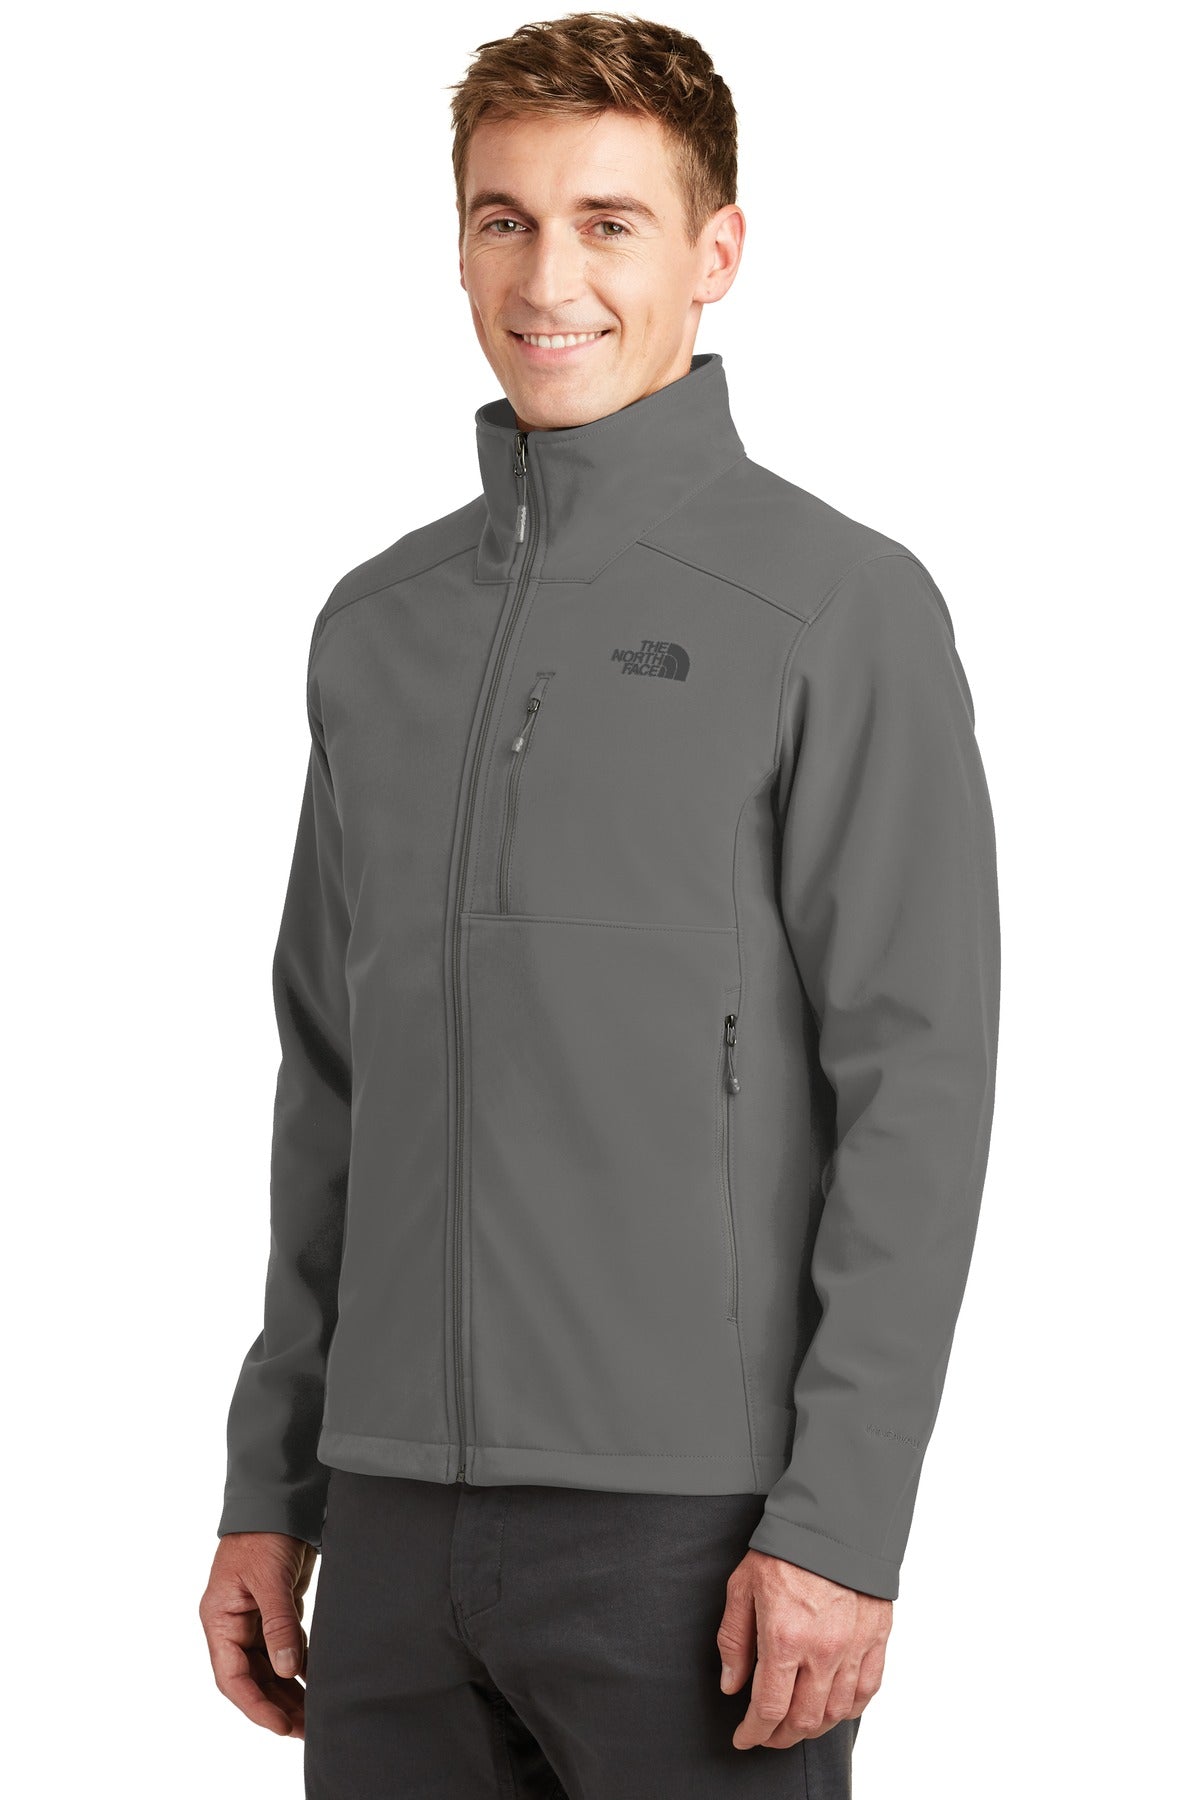 NorthFace Apex Barrier Soft Shell Jacket